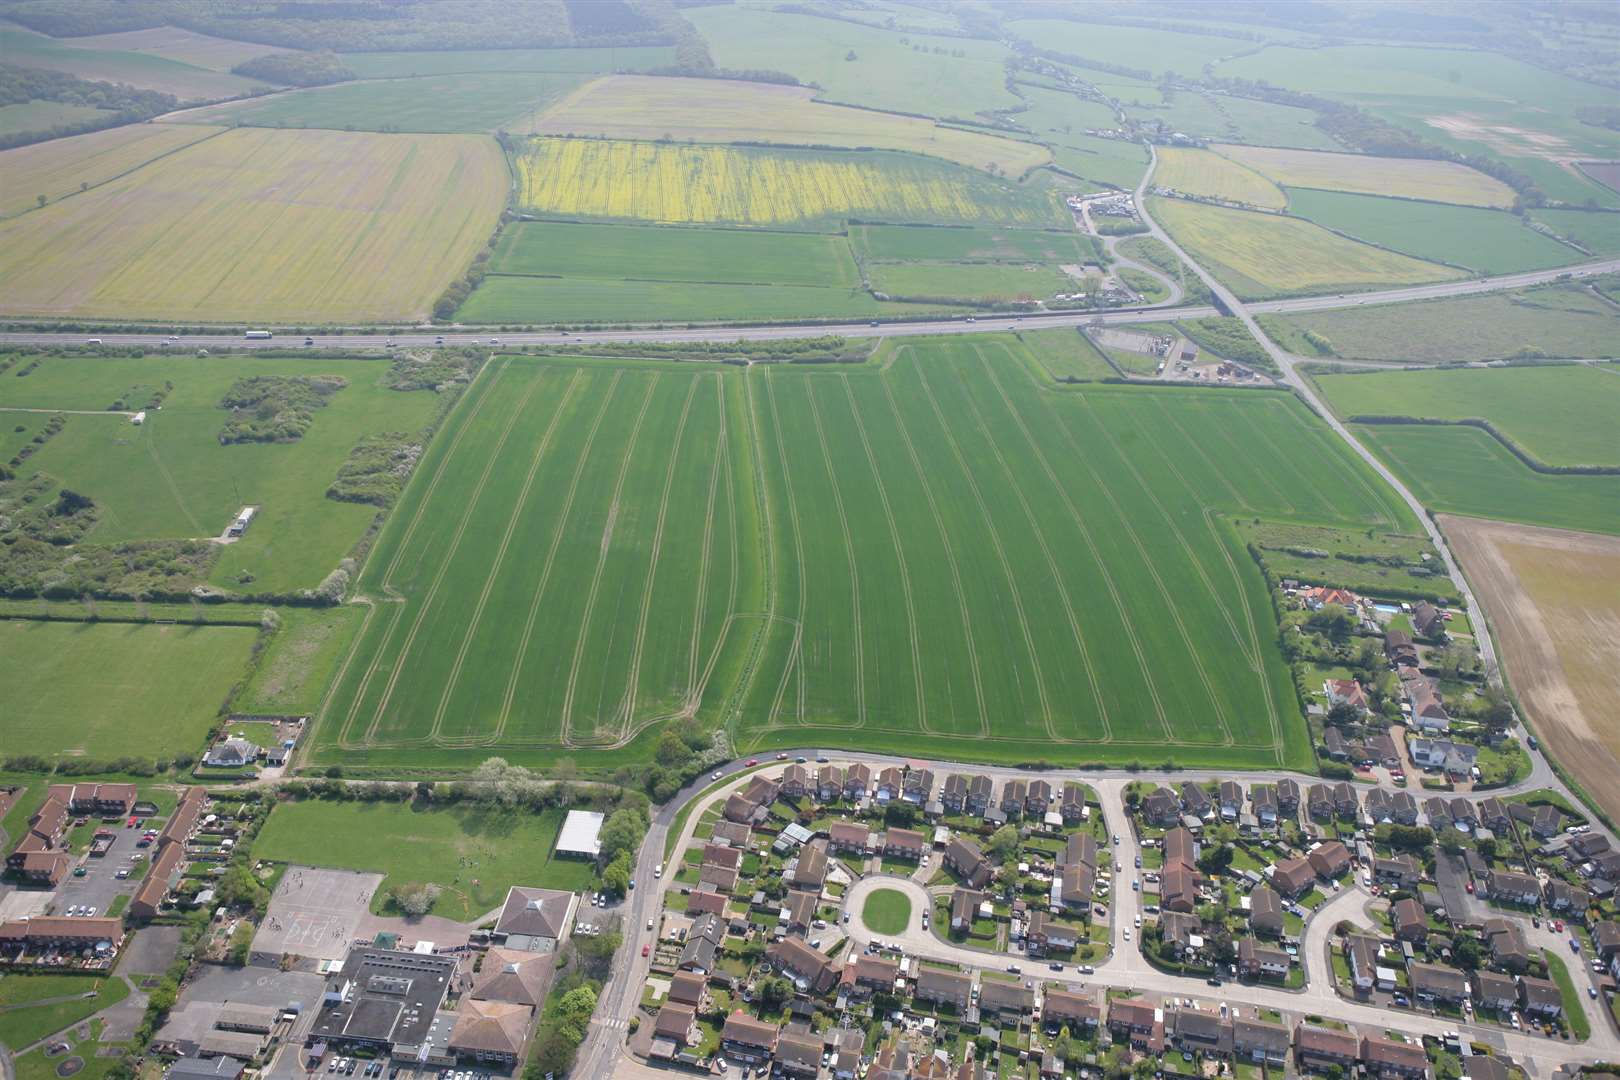 The 53-acre plot of land is located between Greenhill Road, Thornden Wood Road and the Thanet Way.